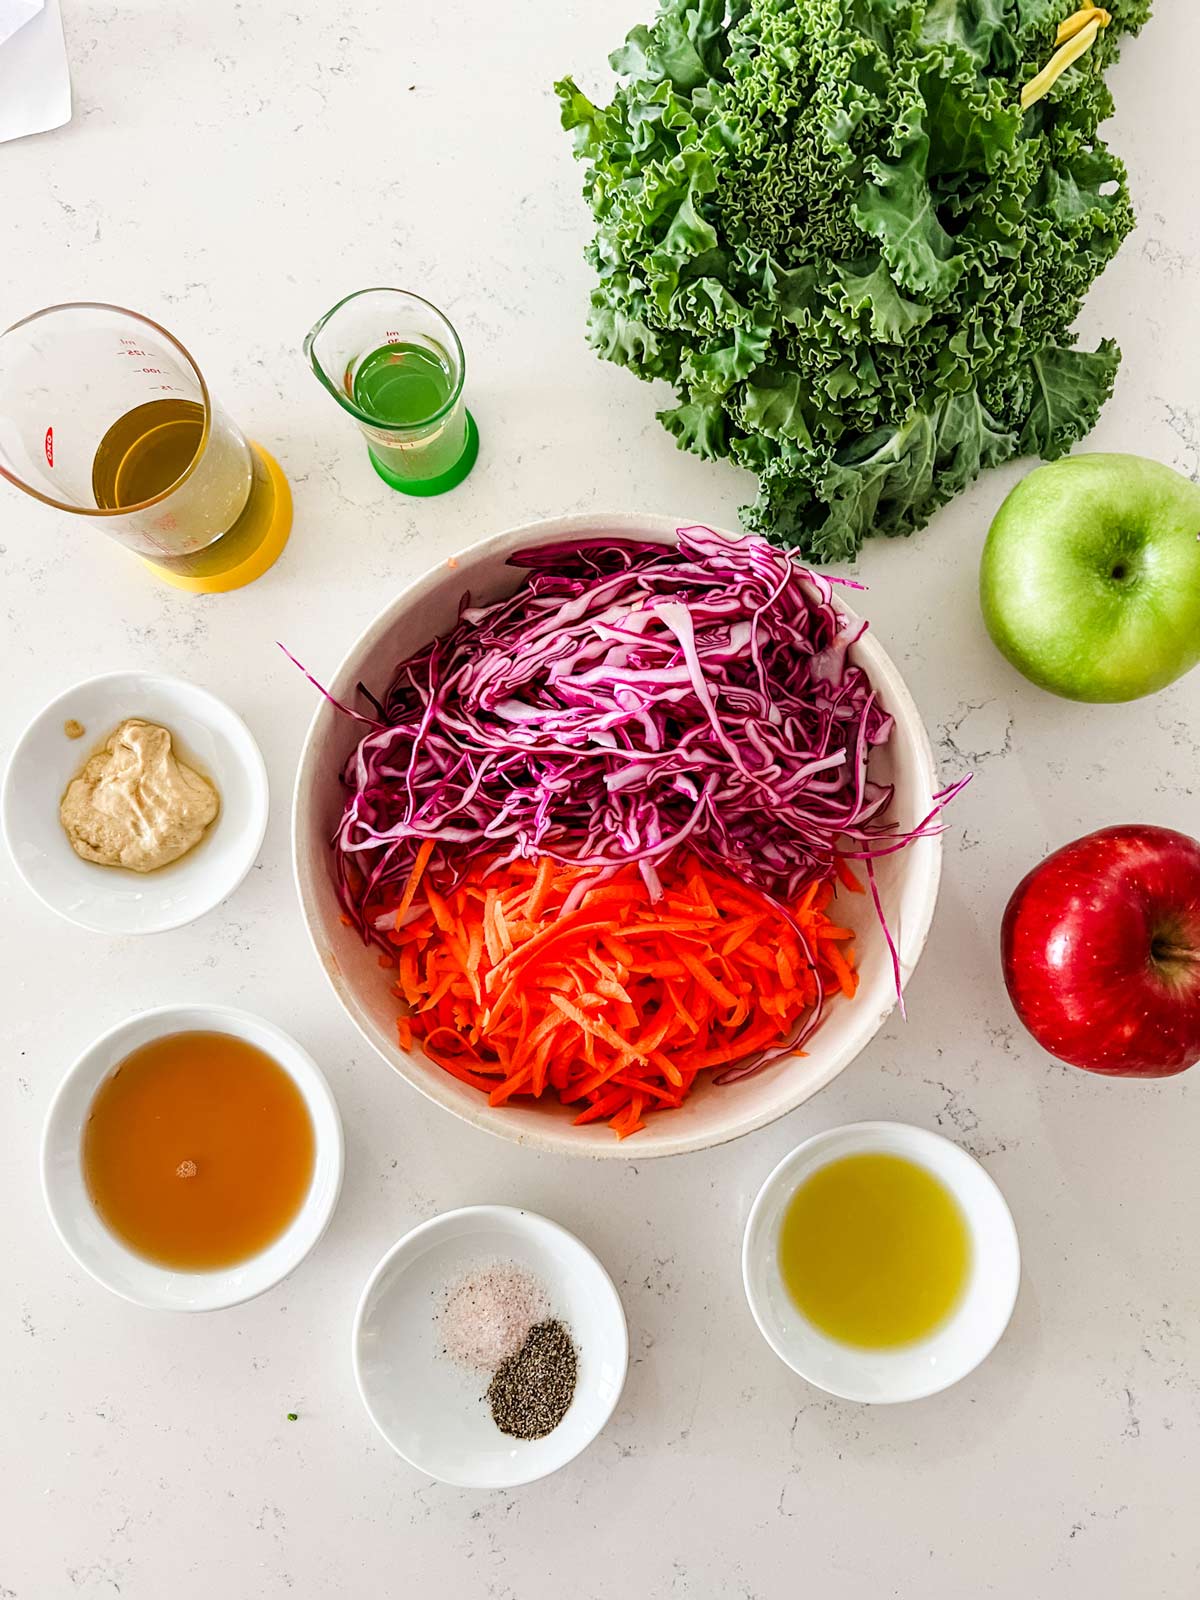 Overhead photo of kale, apples, carrot, cabbage, and salad dressing ingredients.